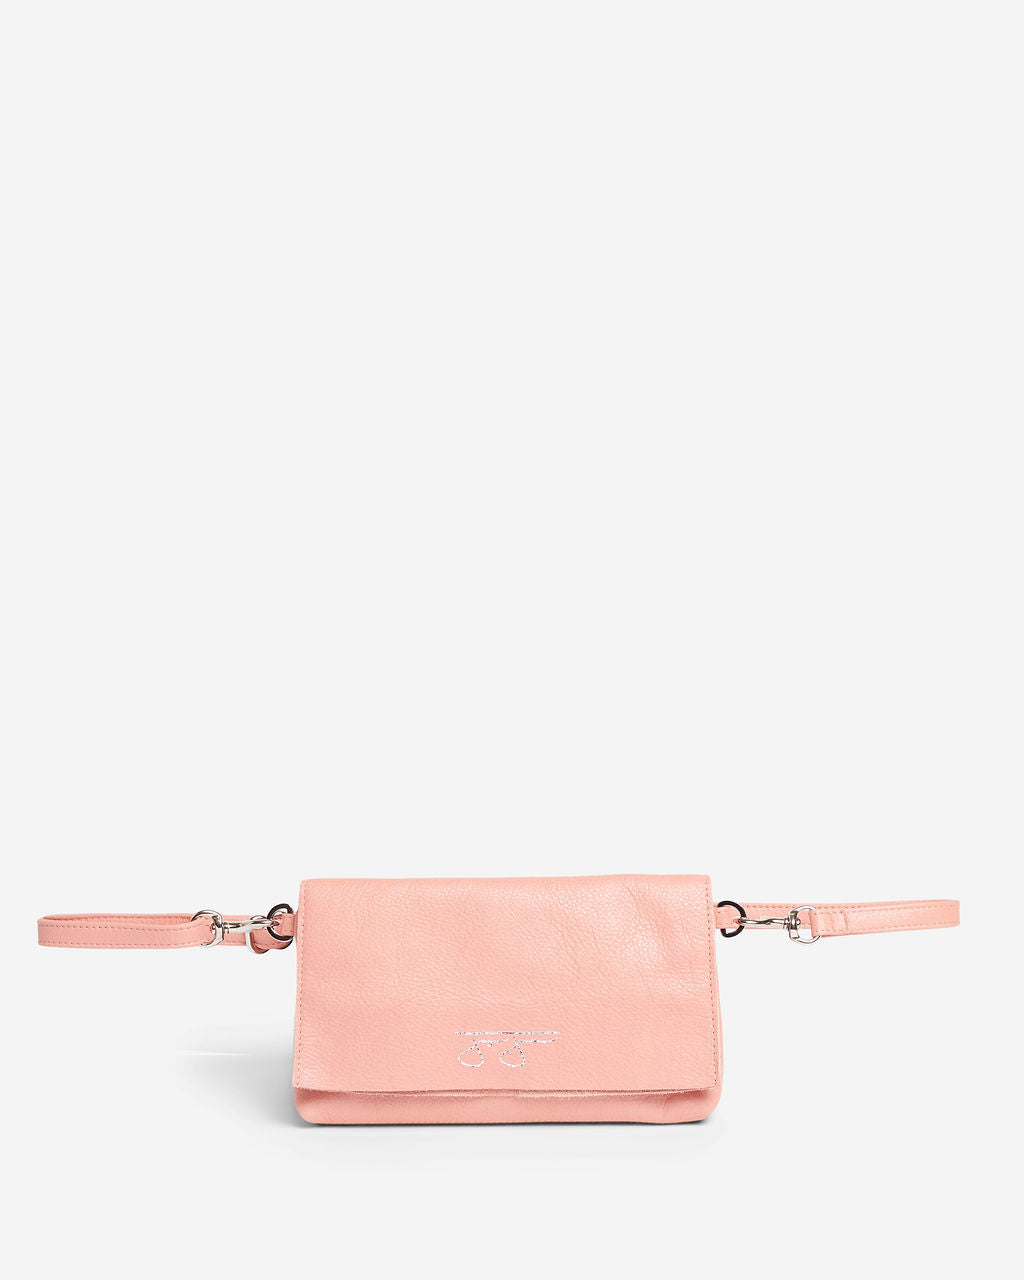 Norma Hipster Bag - Buffed Pink  Joey James, The Label   